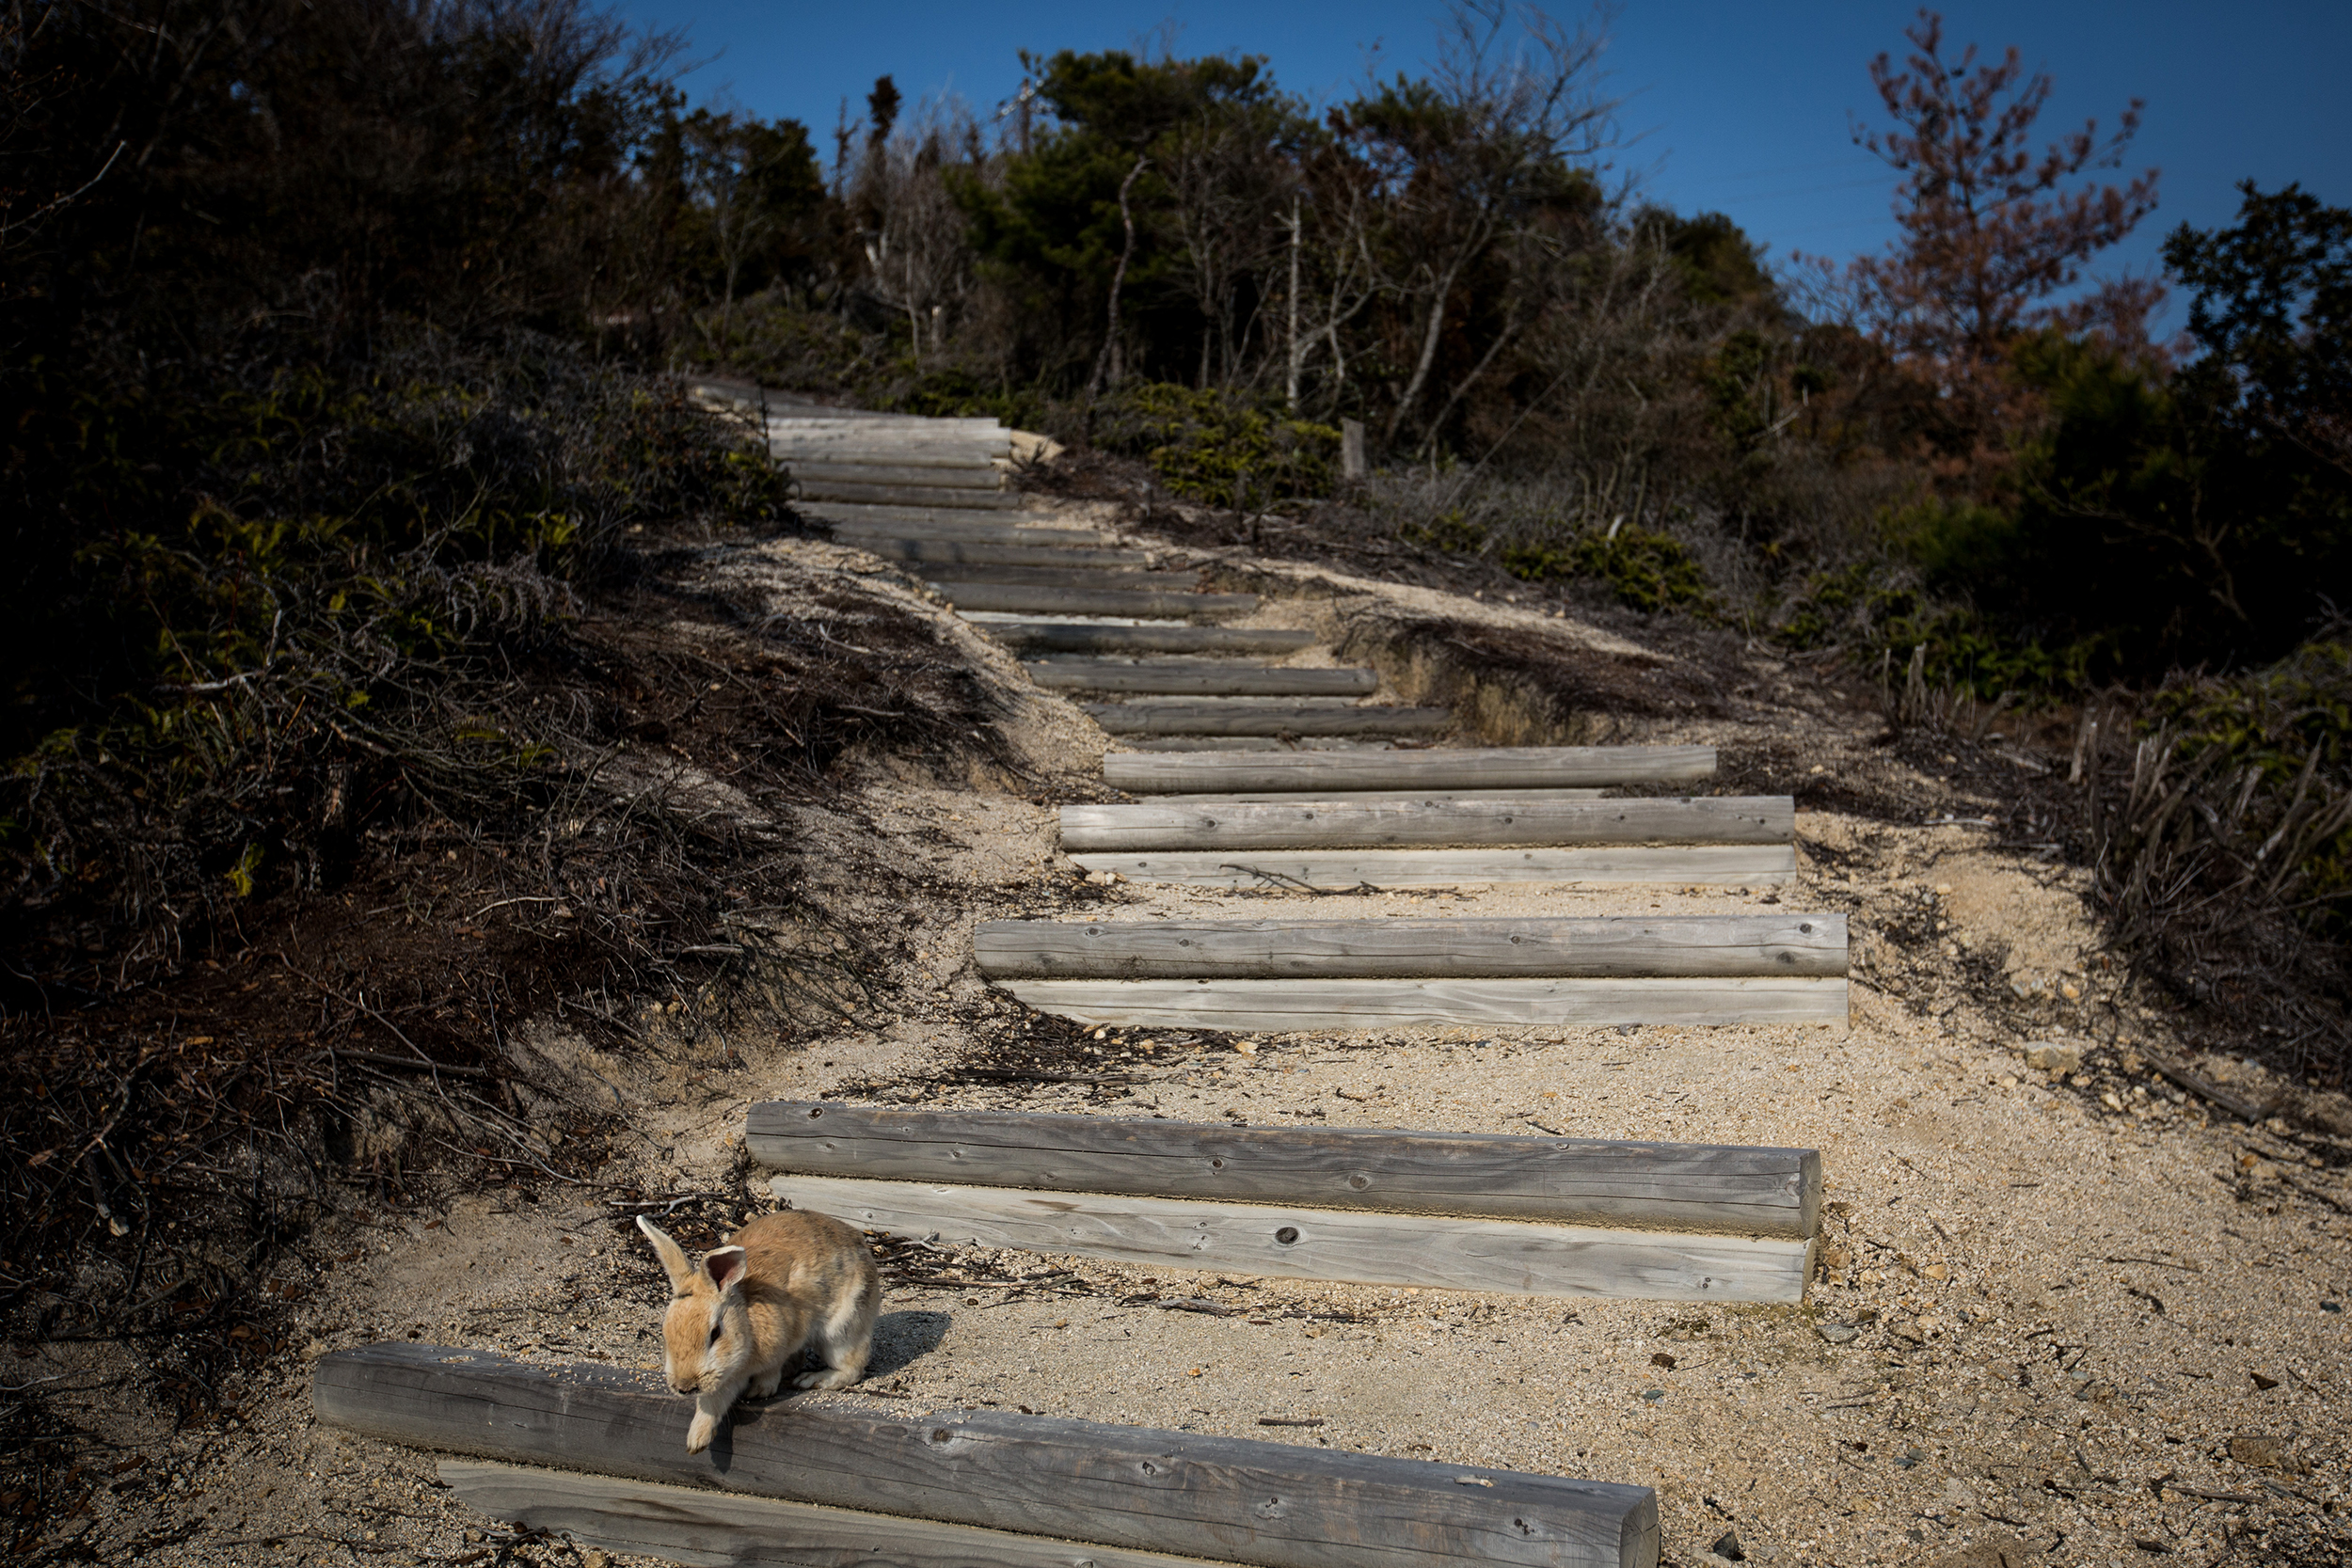 A rabbit is seen on a pathway leading to the ruins of a fort on Okunoshima Island on Feb. 24, 2014 in Takehara, Japan. Okunoshima is a small island located in the Inland Sea of Japan in Hiroshima Prefecture. The Island often called Usagi Jima or  Rabbit Island  is famous for it's rabbit population that has taken over the island and become a tourist attraction with many people coming to the feed the animals and enjoy the islands tourist facilities.  During World War II the island was used as a poison gas facility.  The island was so secret that local residents were told to keep away and it was removed from area maps. Today ruins of the old forts and chemical factories can be found all across the island.